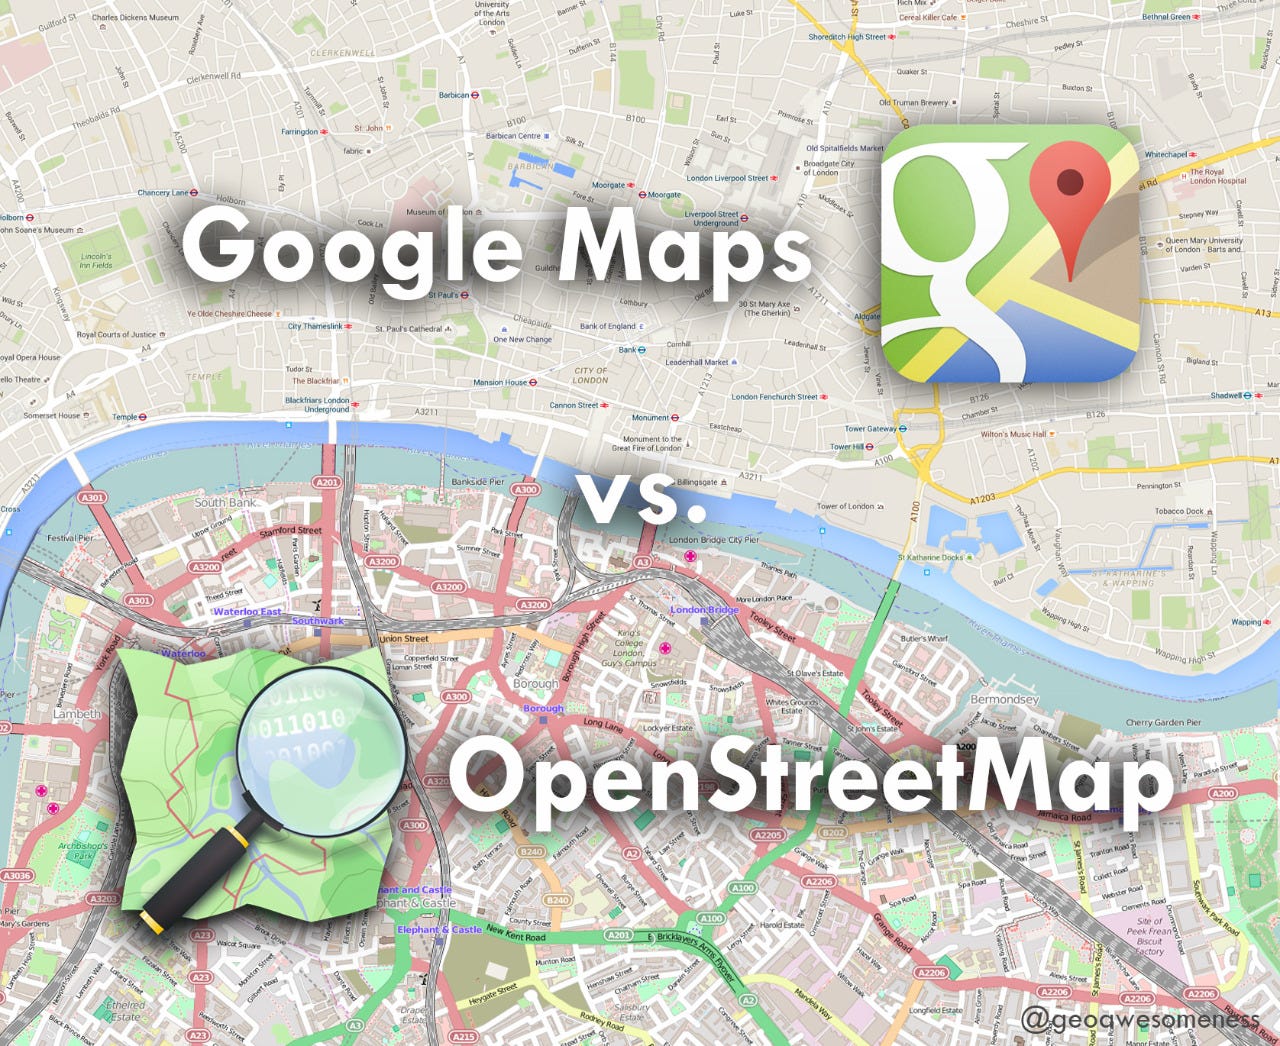 How are Google Maps different from OpenStreetMap?